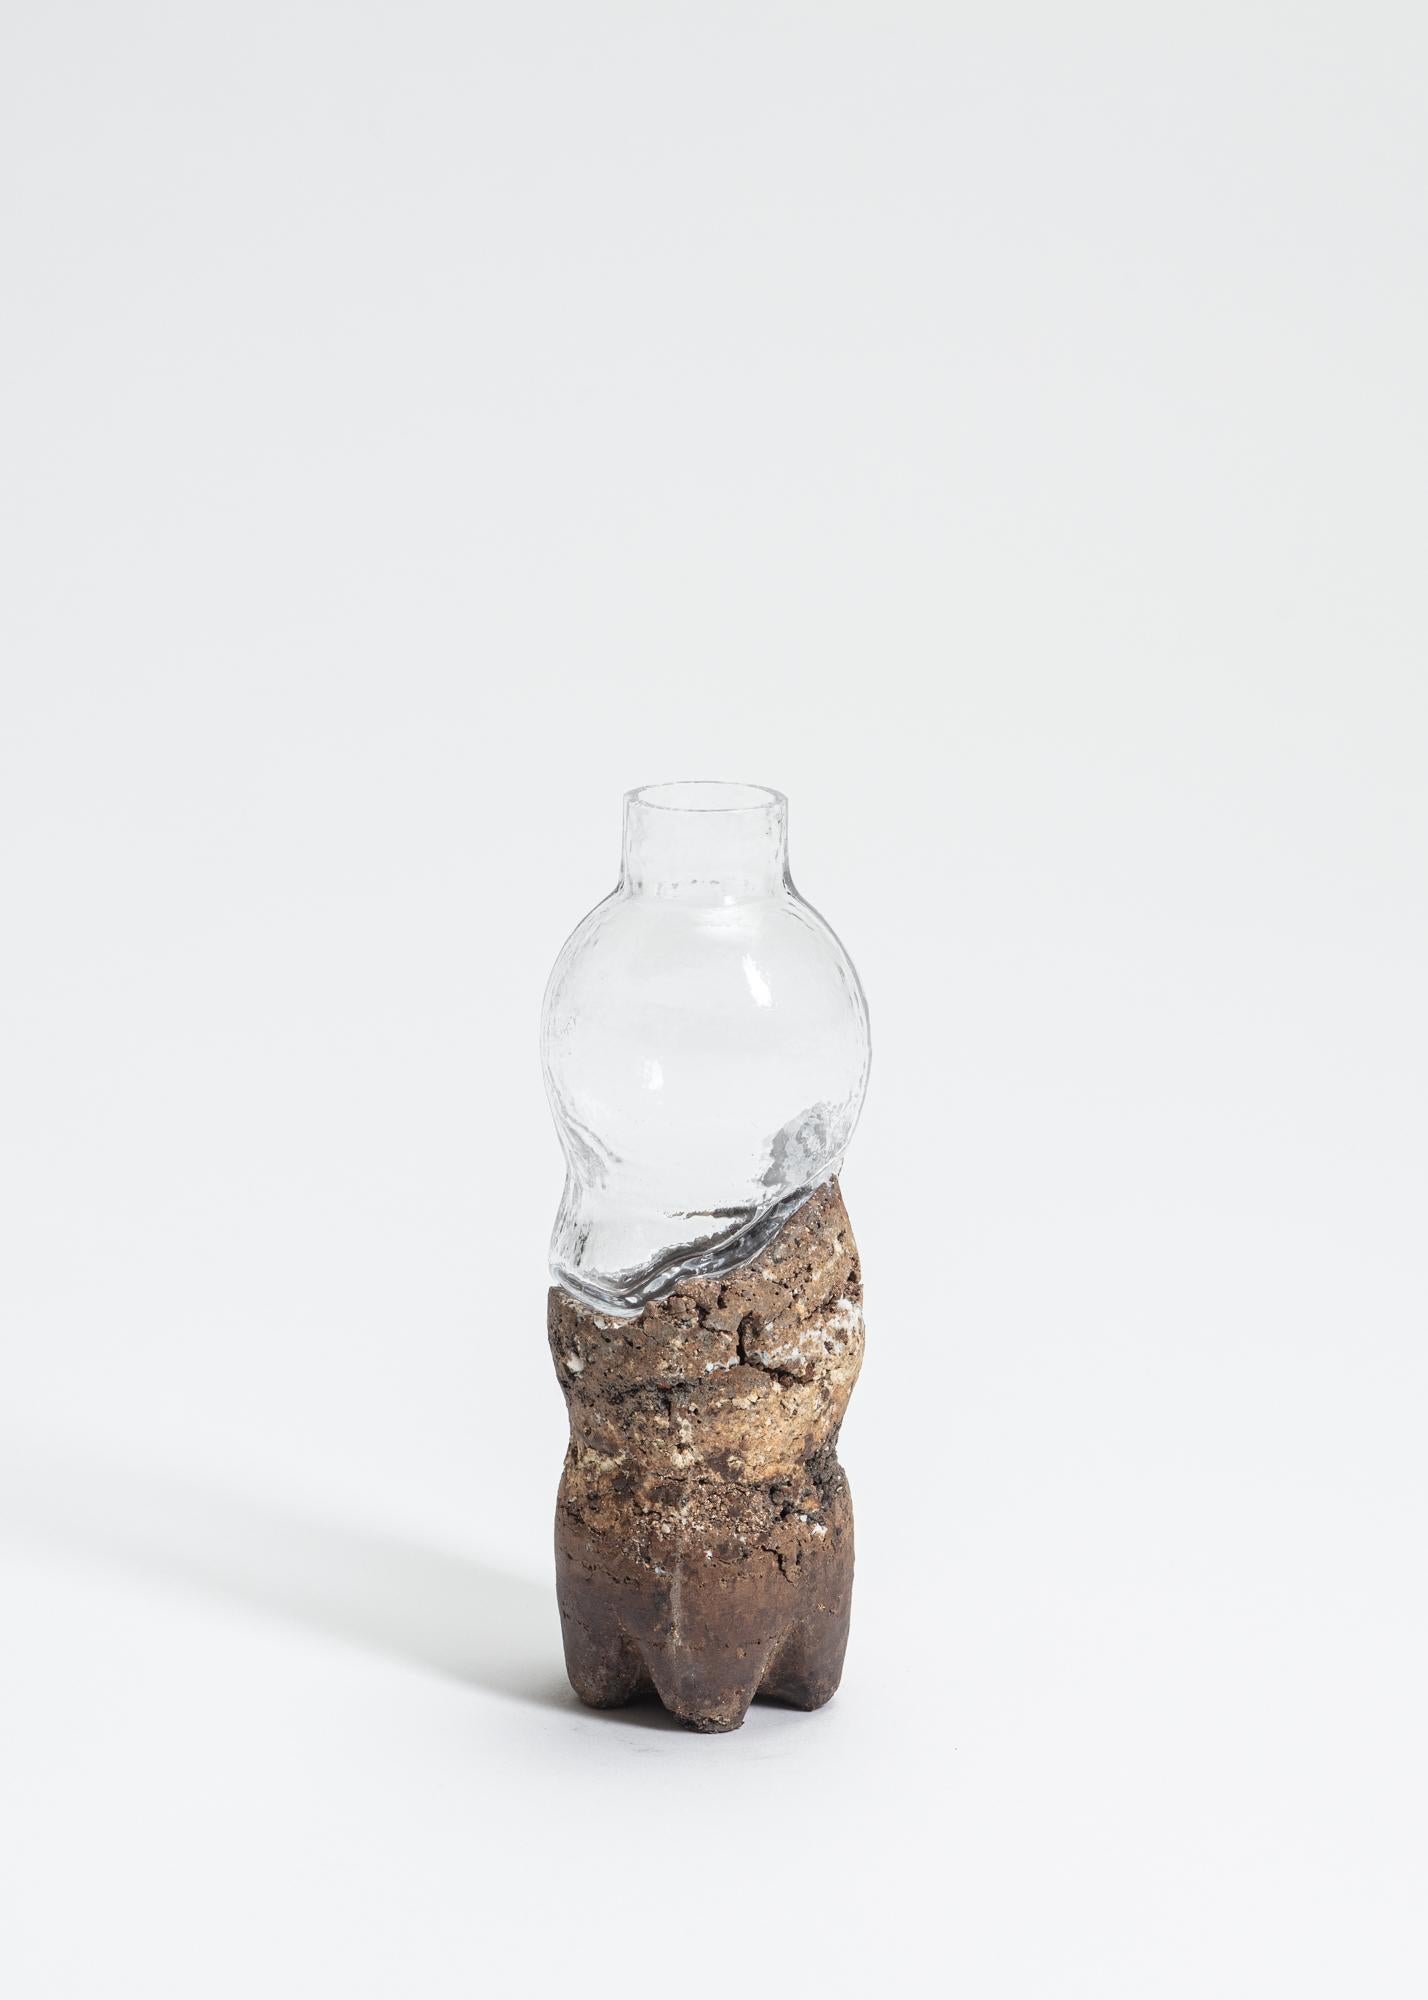 FUWA FUWA, No 7 Bottle by Yusuke´ Y. Offhause
One of a Kind, the work is in two parts (ceramic and glass).
Dimensions: D 6.5 x W 6.5 x H 18 cm.
Materials: stoneware, porcelain, glass.

Yusuke´ Y. Offhause:
